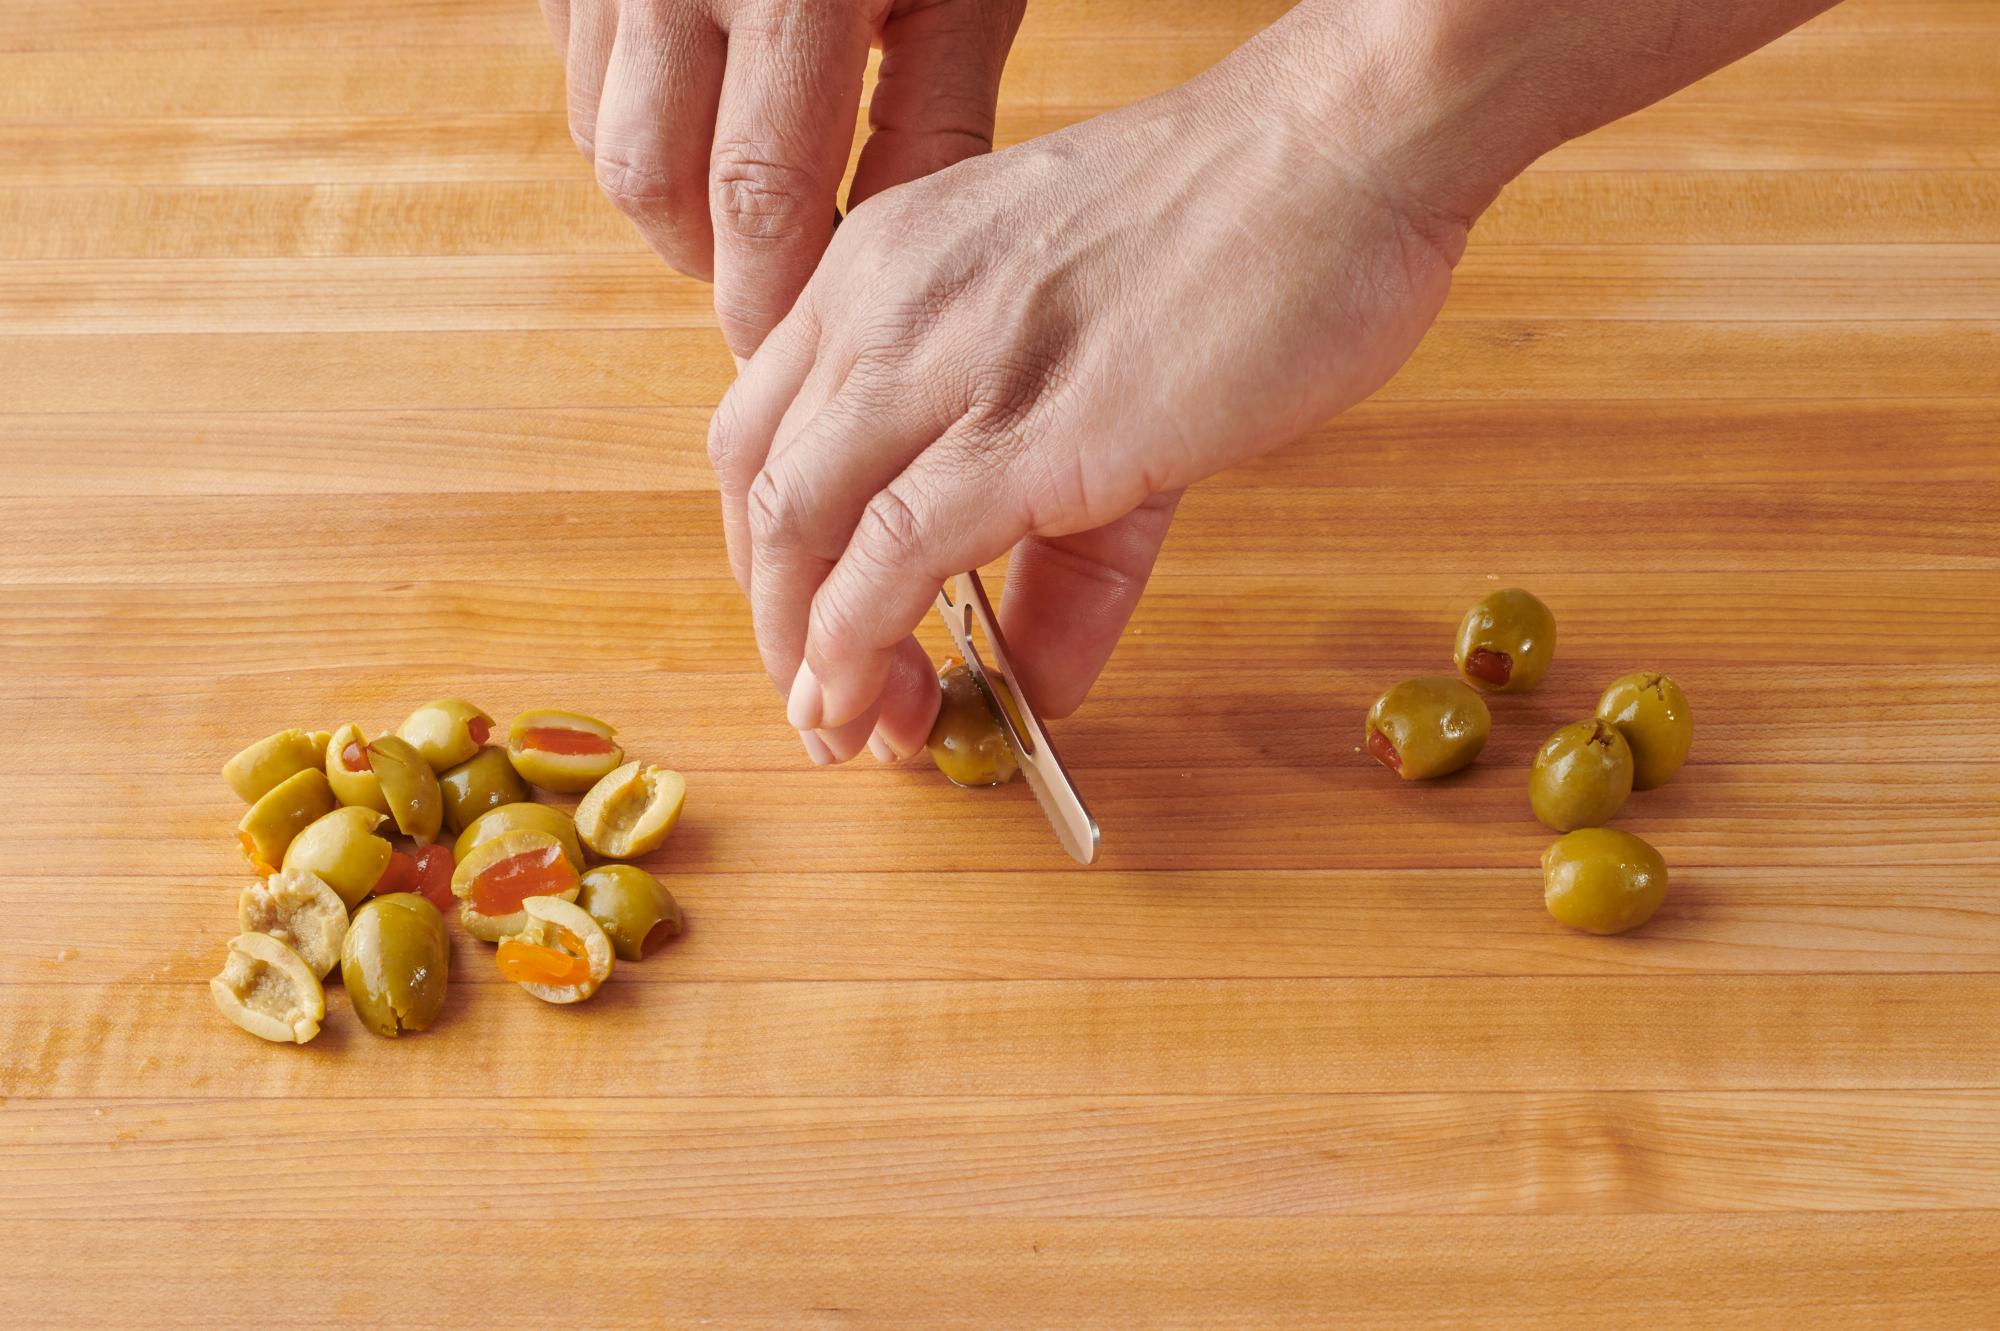 Cutting the Olives with a Mini Cheese Knife.